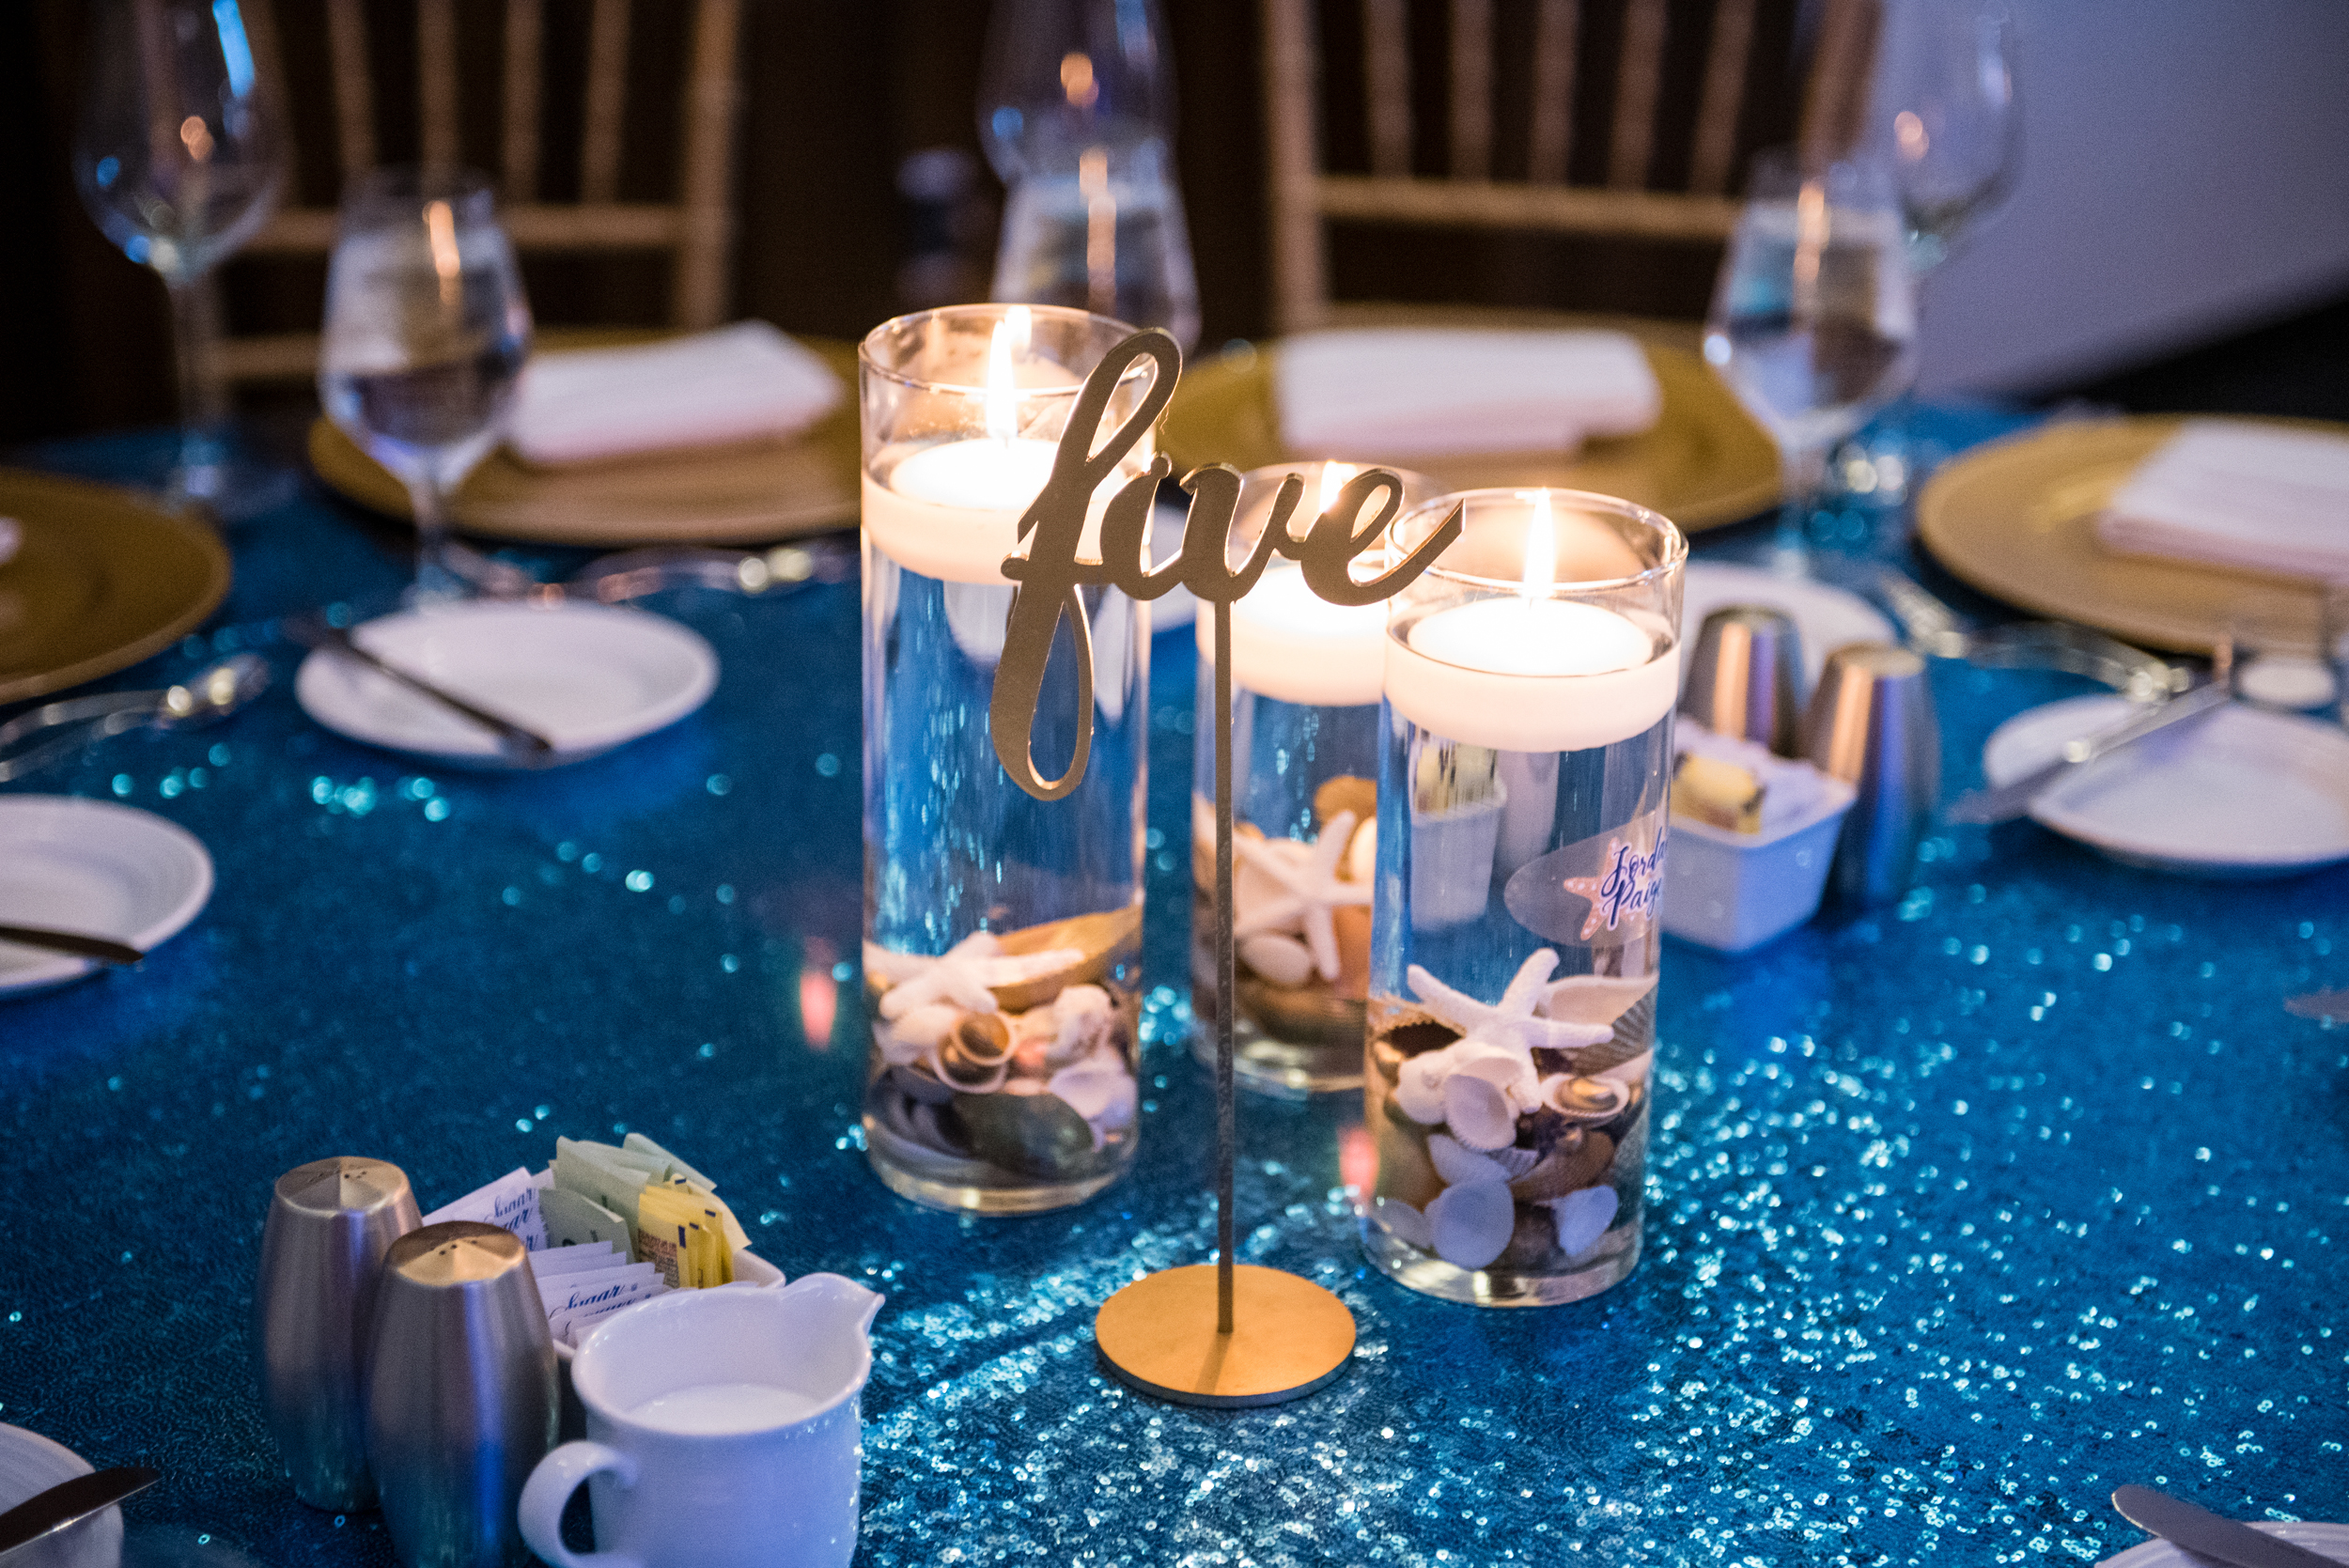 Shell centerpieces at Jordan's Sparkling Beach Bat Mitzvah at Hyatt Regency Tysons Corner Center Virginia | Pop Color Events | Adding a Pop of Color to Bar & Bat Mitzvahs in DC, MD & VA | Photo by: Lacey Ann Photography